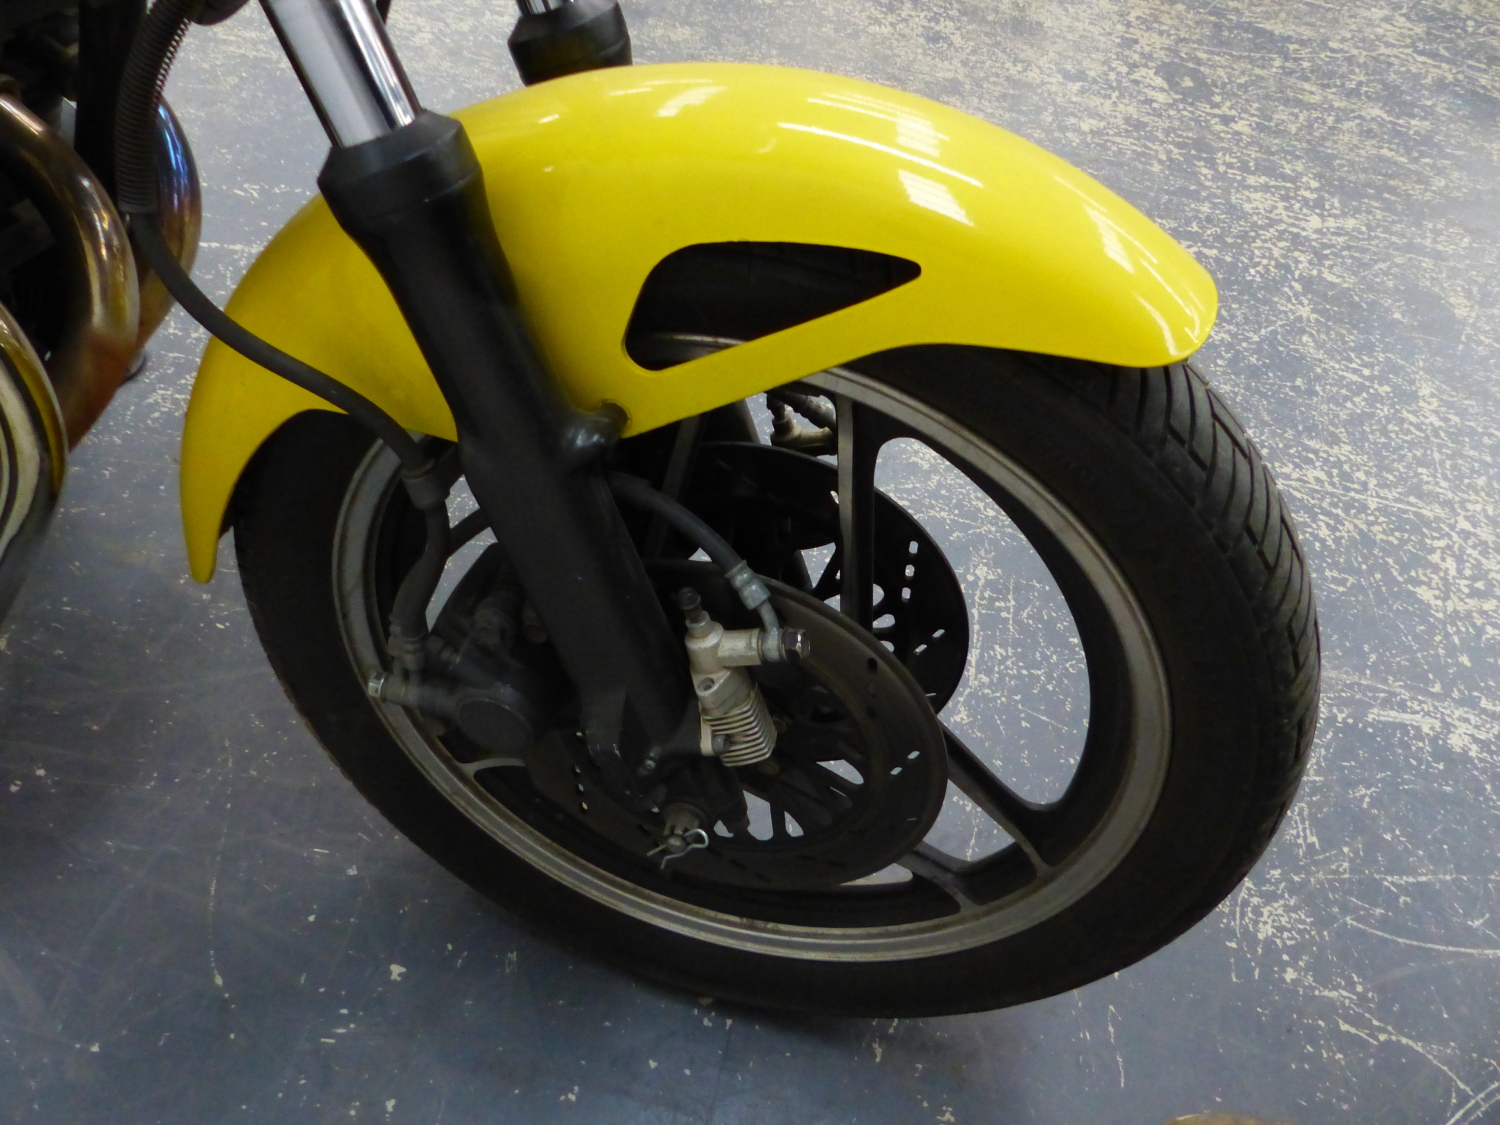 SUZUKI GSX1100E (1983) REG NO KEG 557Y GSX1100E- THIS CUSTOMISED 1983 GSX, SUPPLIED NEW ABROAD AND - Image 12 of 12